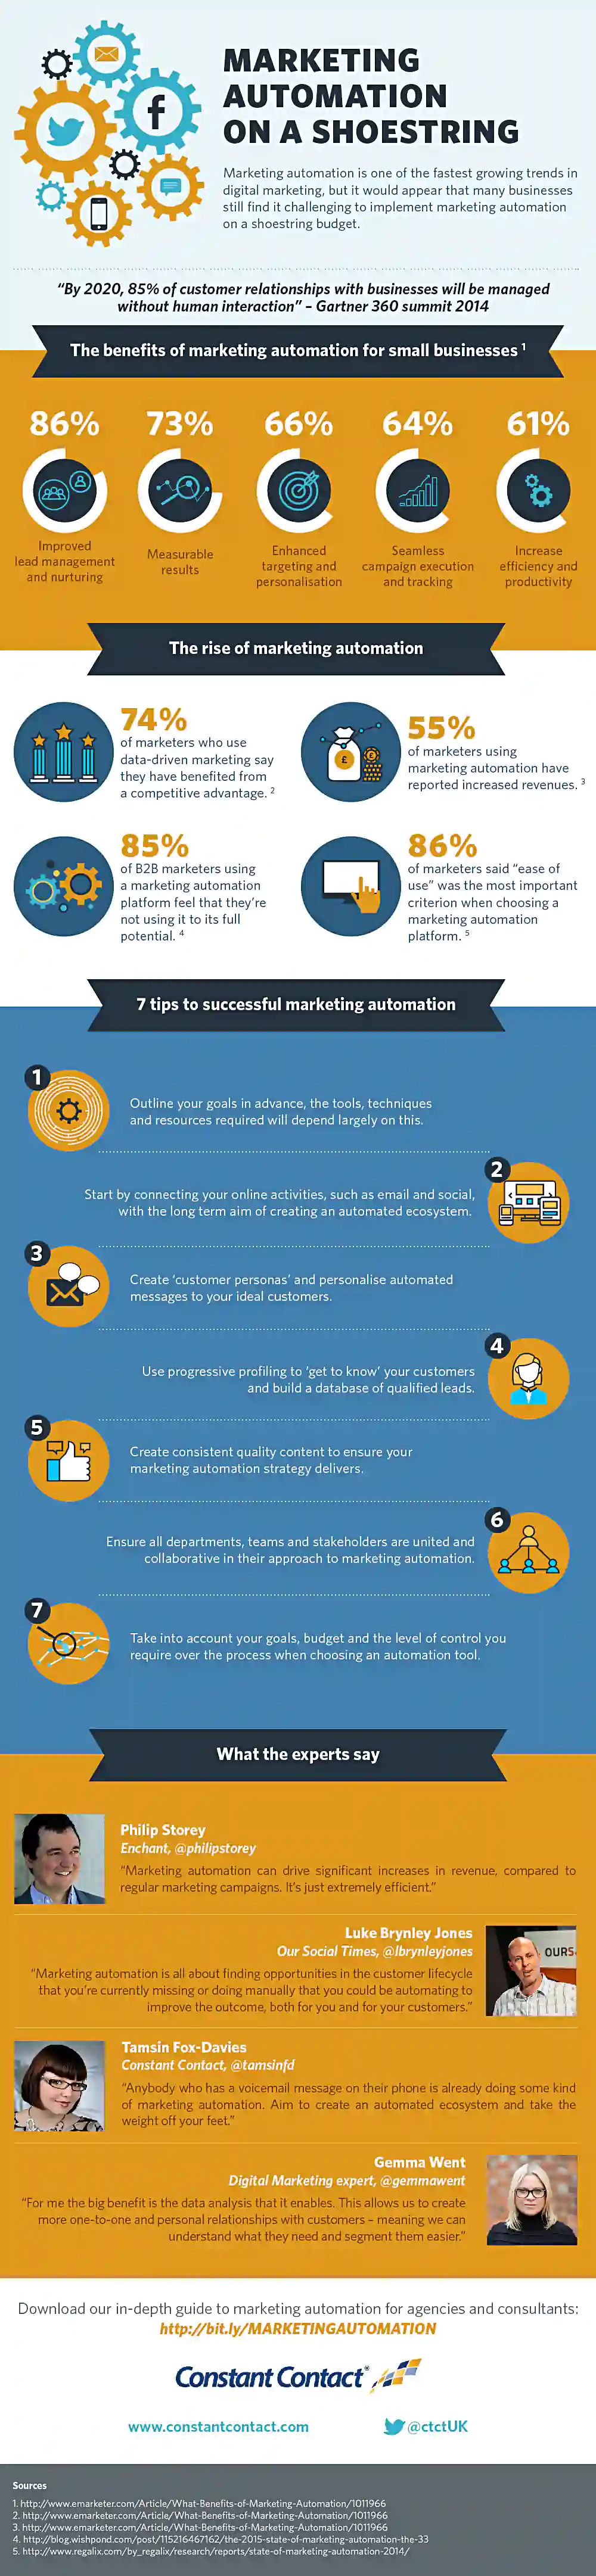 Benefits of Marketing Automation for Small Businesses